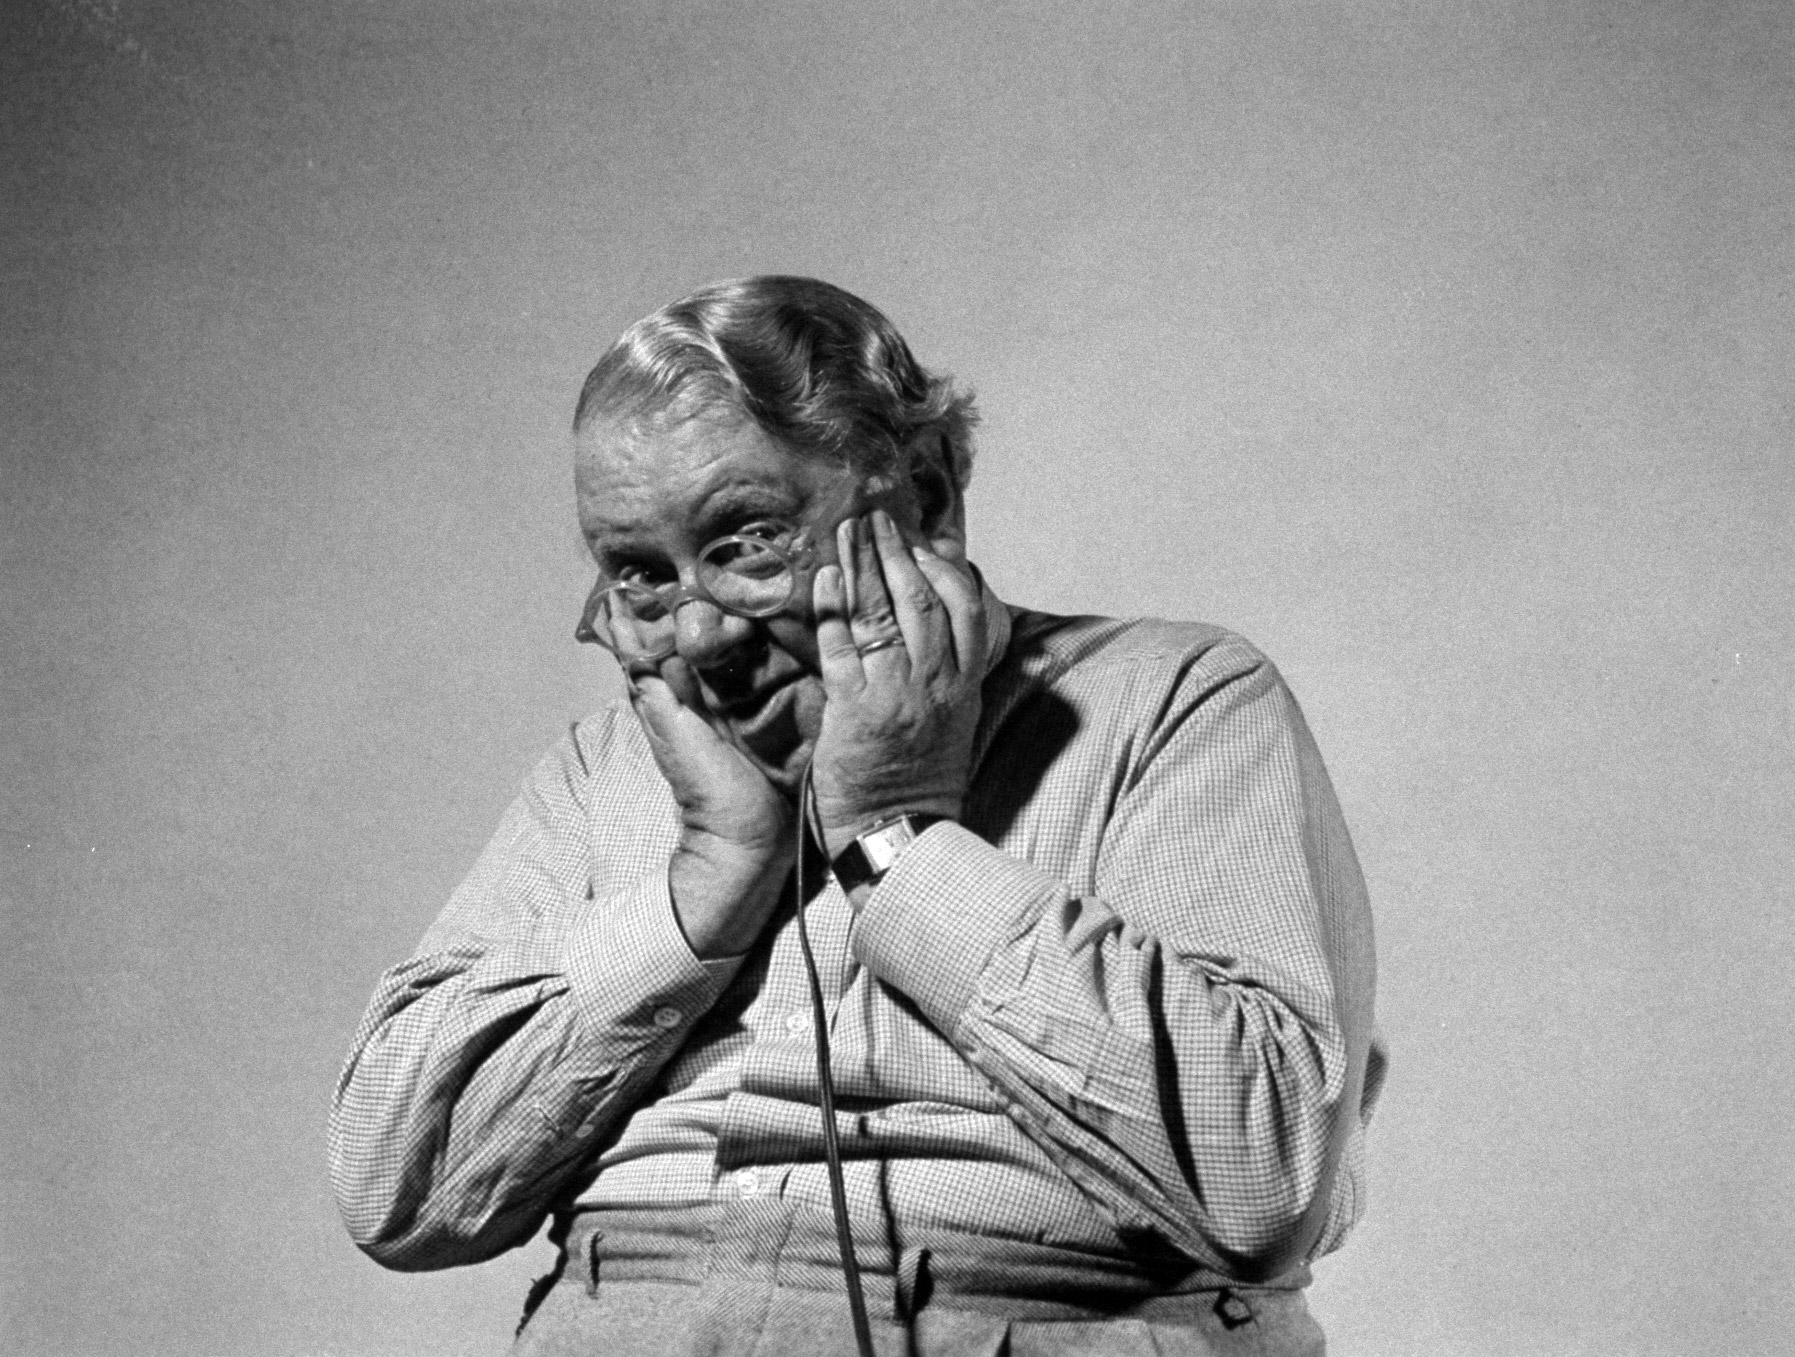 Actor S. Z. Sakall "Cuddles" holding shutter release as he takes his own photograph.